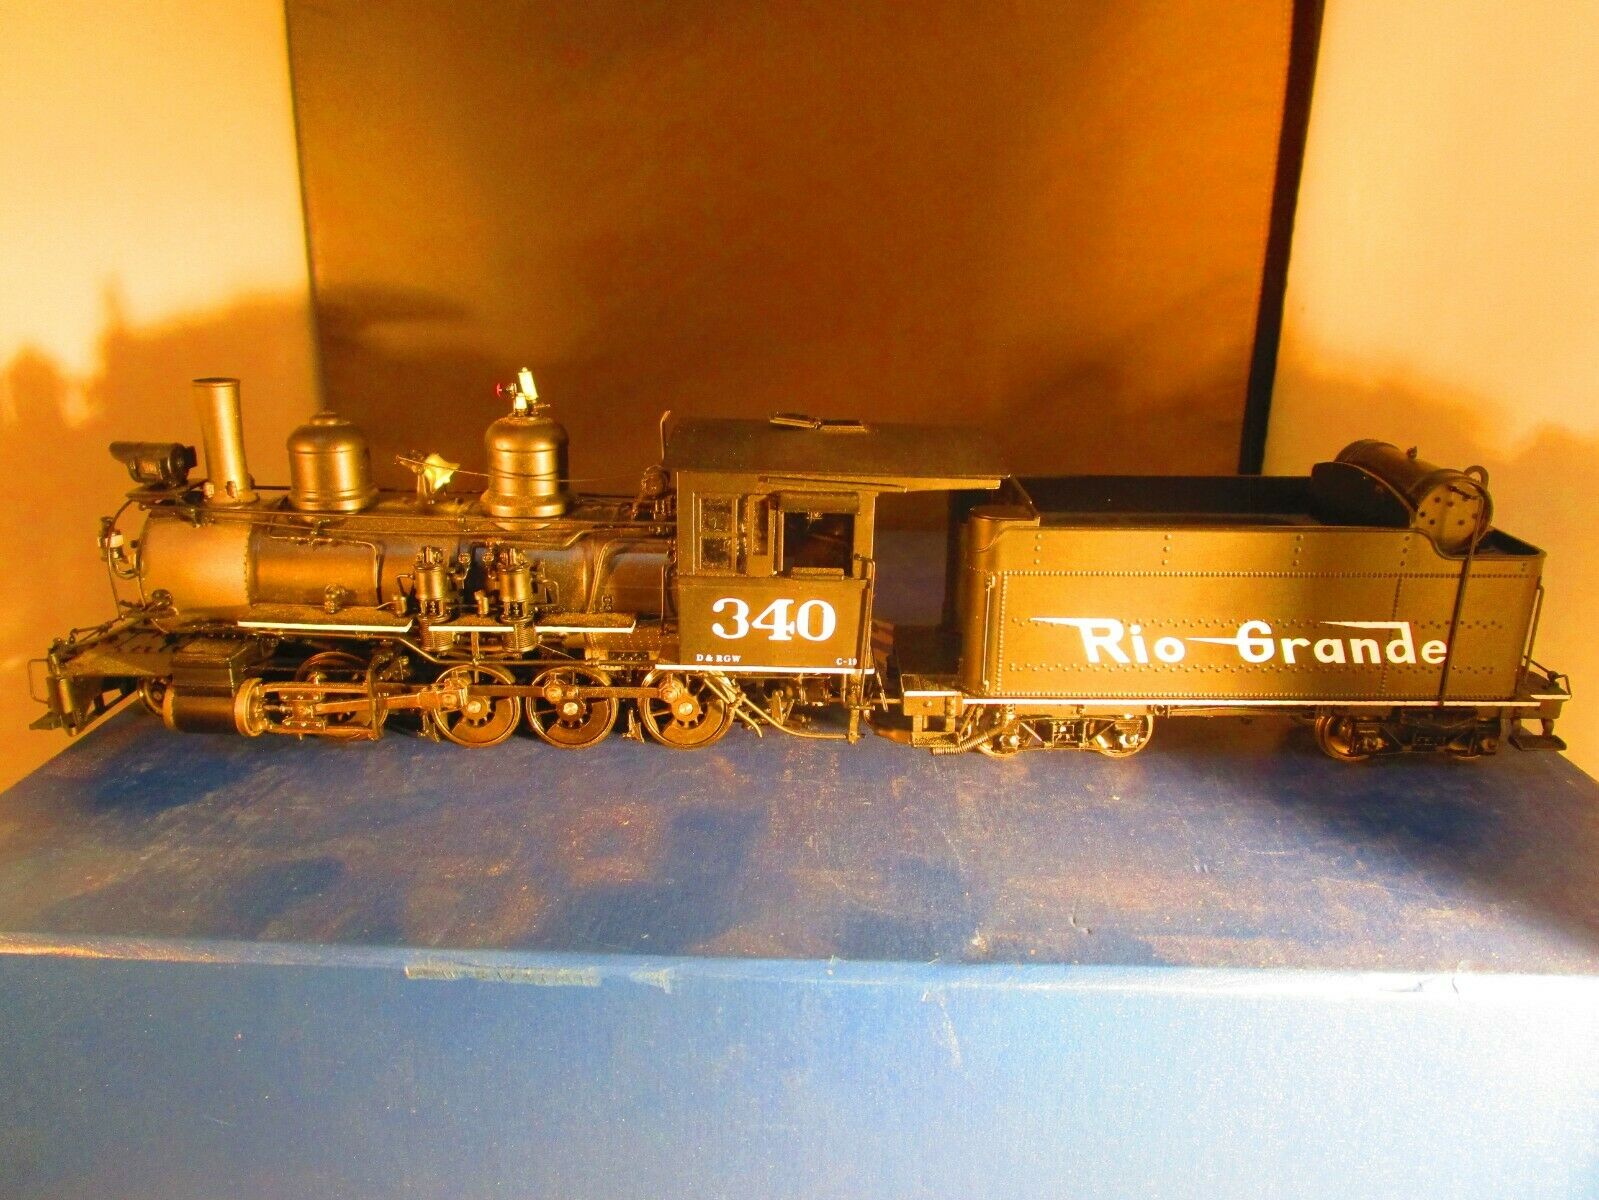 On3 Psc/mmi Brass/cast D&rgw C-19 2-8-0 Steam Locomotive With Dcc & Sound # 340